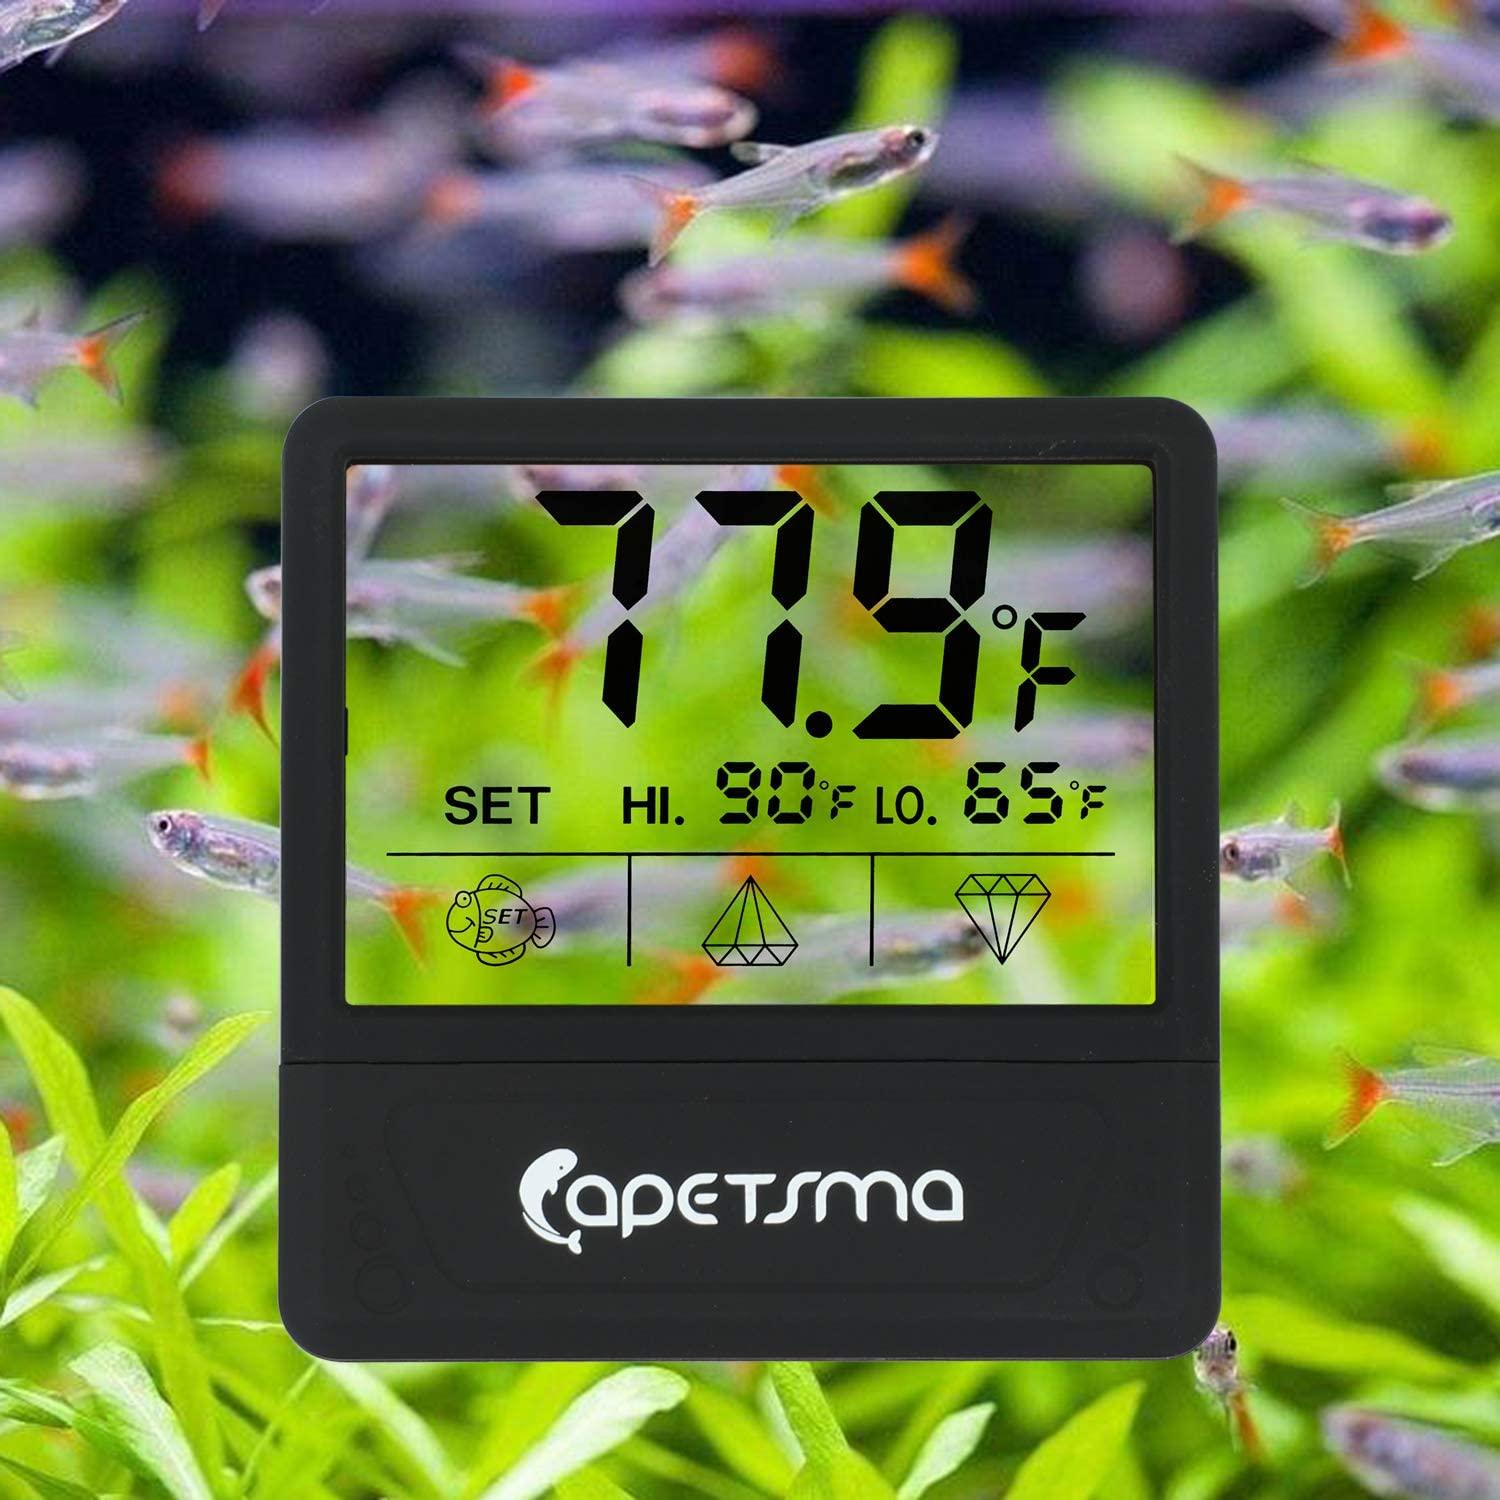 Rechargeable LCD Indoor Outdoor Digital Touchscreen Thermometer